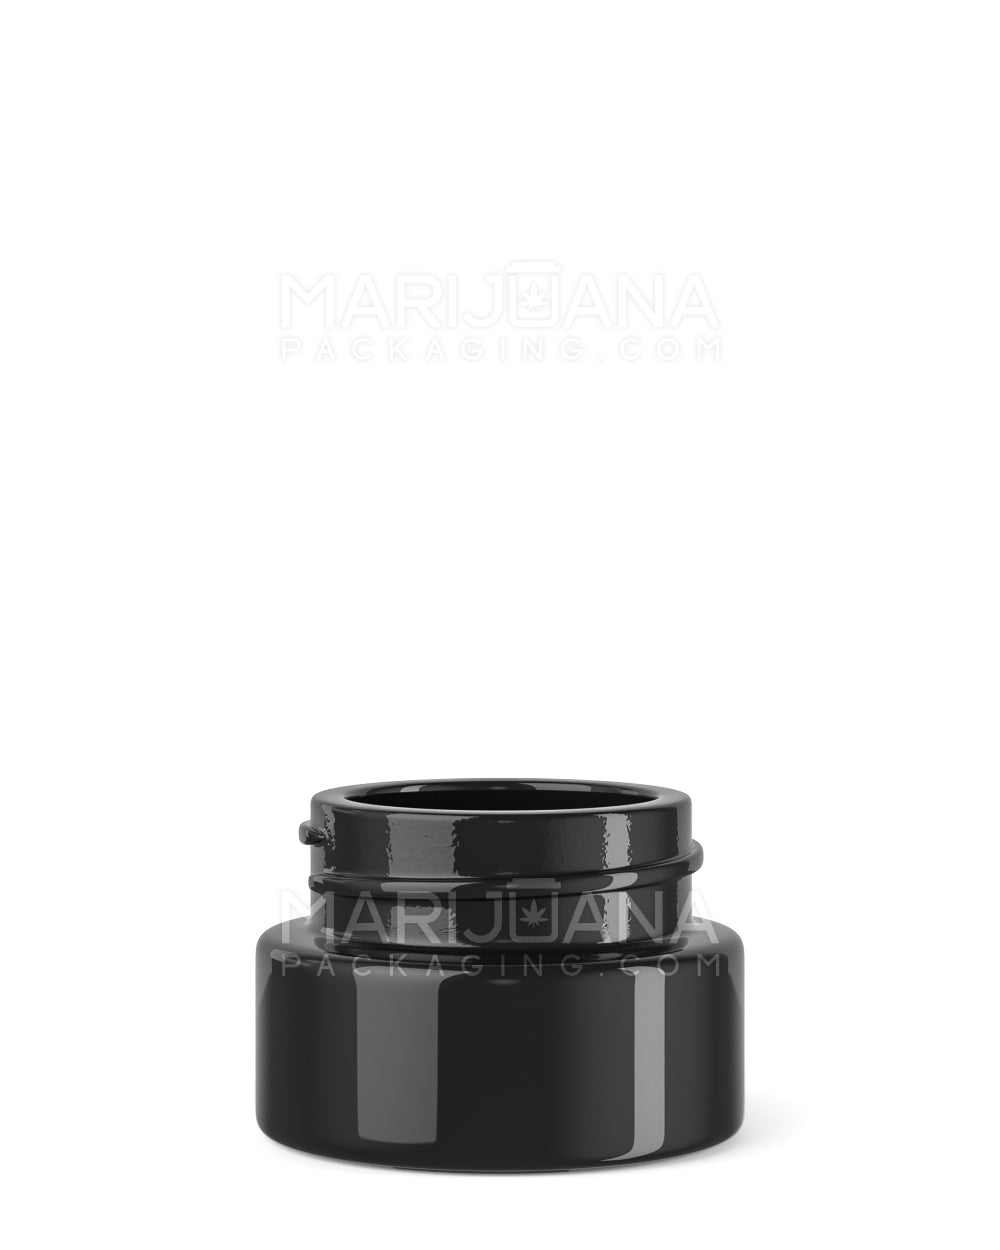 Glossy Black Glass Concentrate Containers | 32mm - 9mL - 320 Count - 1